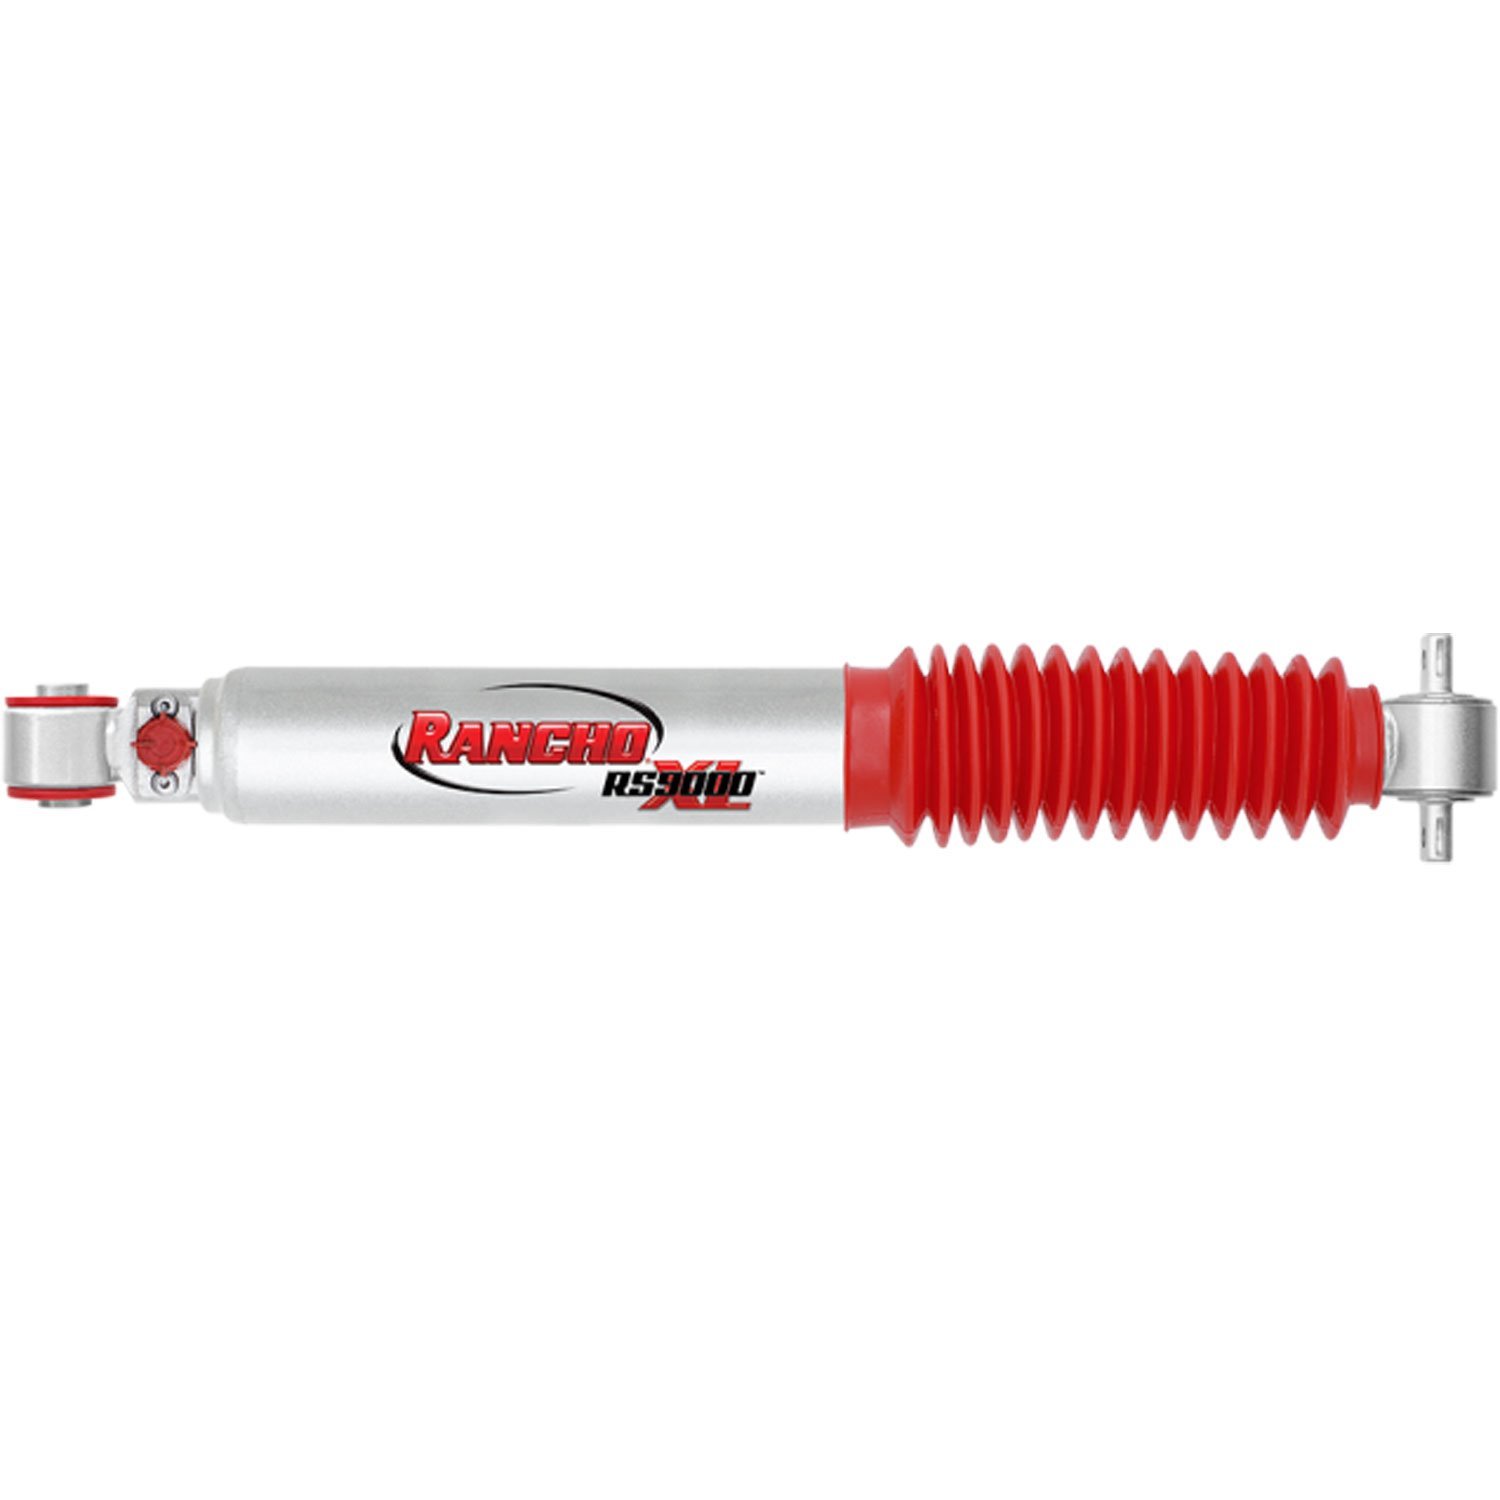 RS9000XL Rear Shock Absorber Fits Ford Explorer, Explorer Sport and Explorer Sport Trac